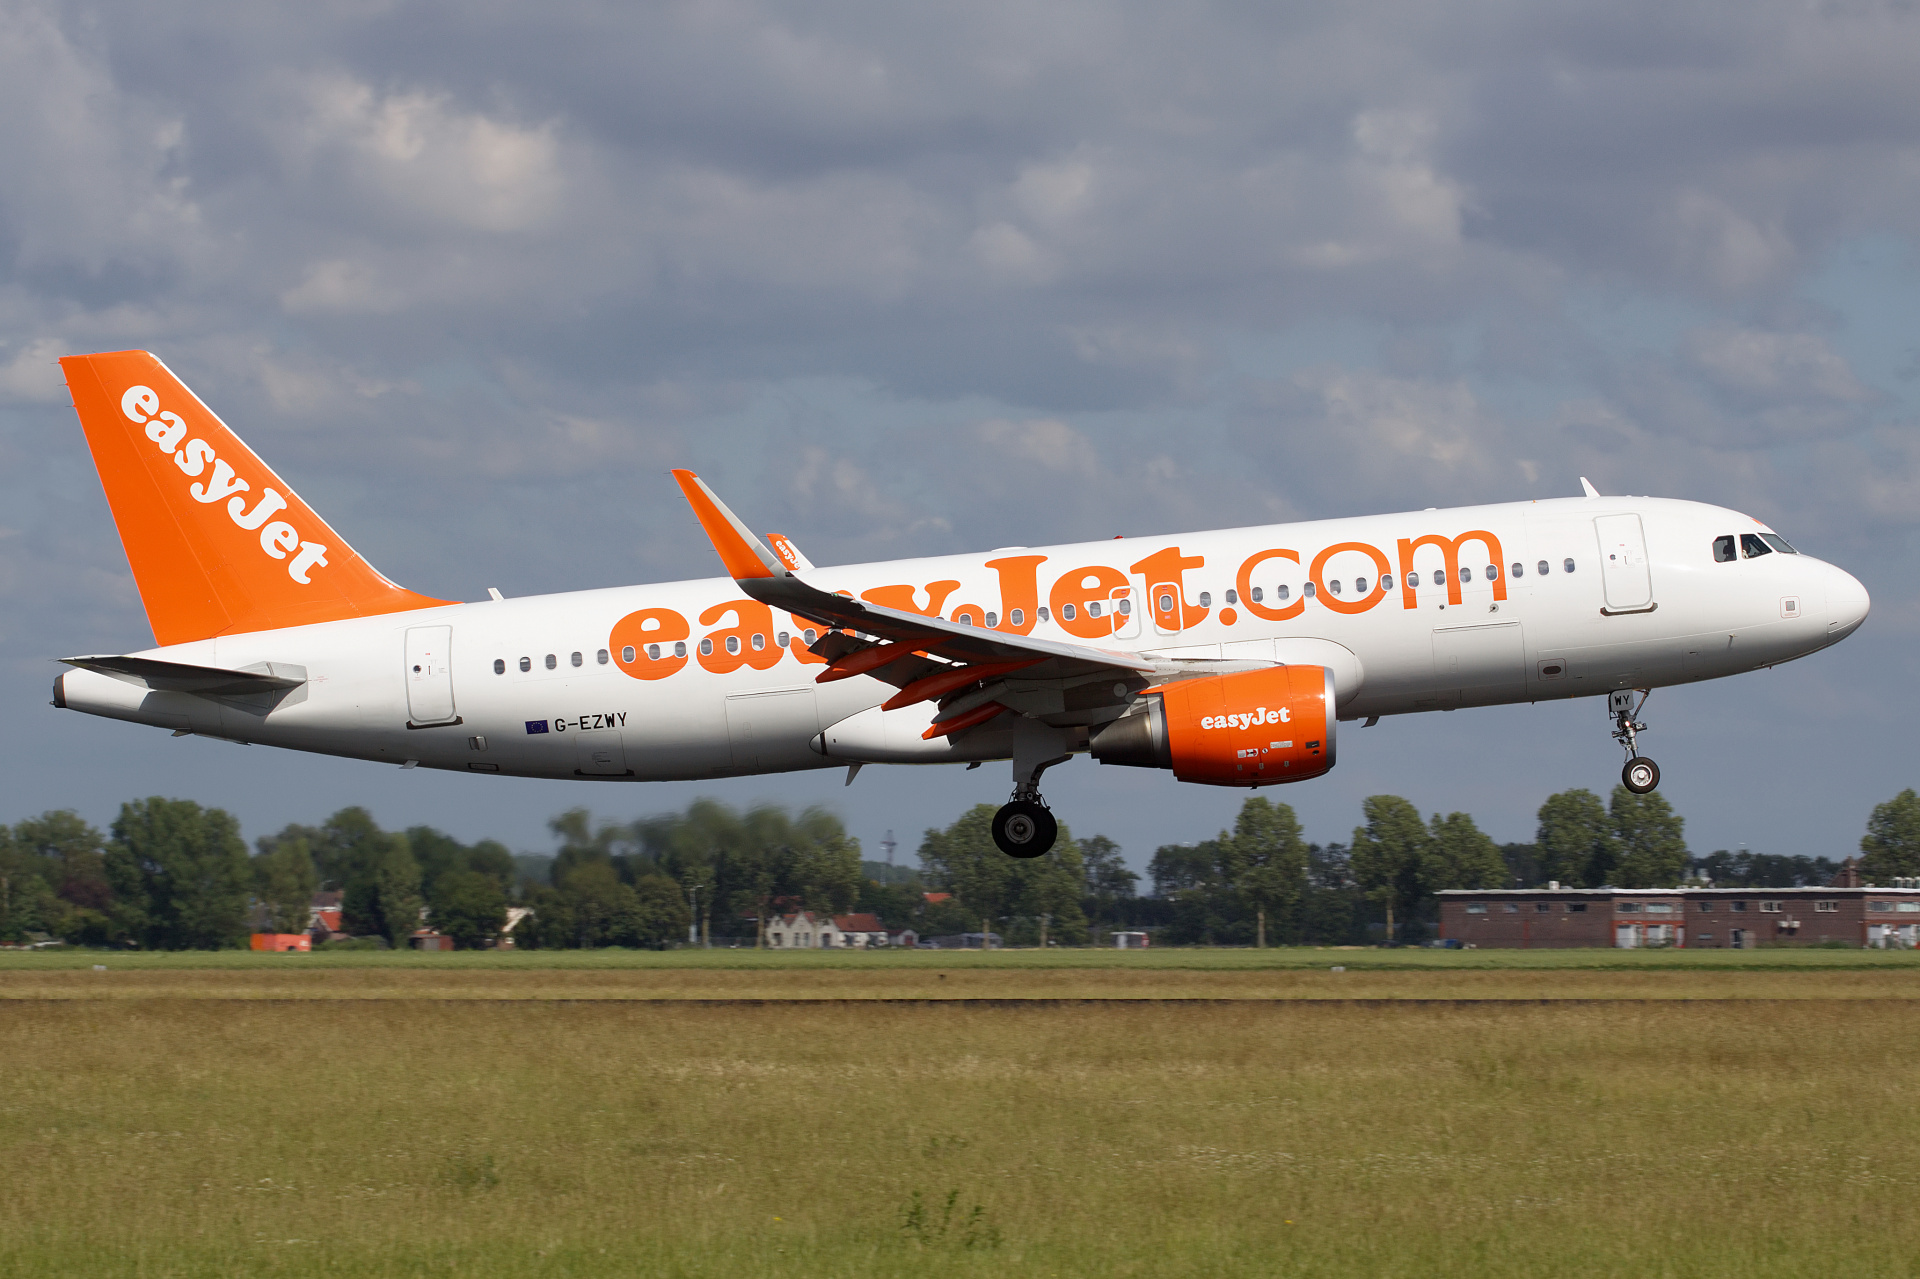 G-EZWY (Aircraft » Schiphol Spotting » Airbus A320-200 » EasyJet)